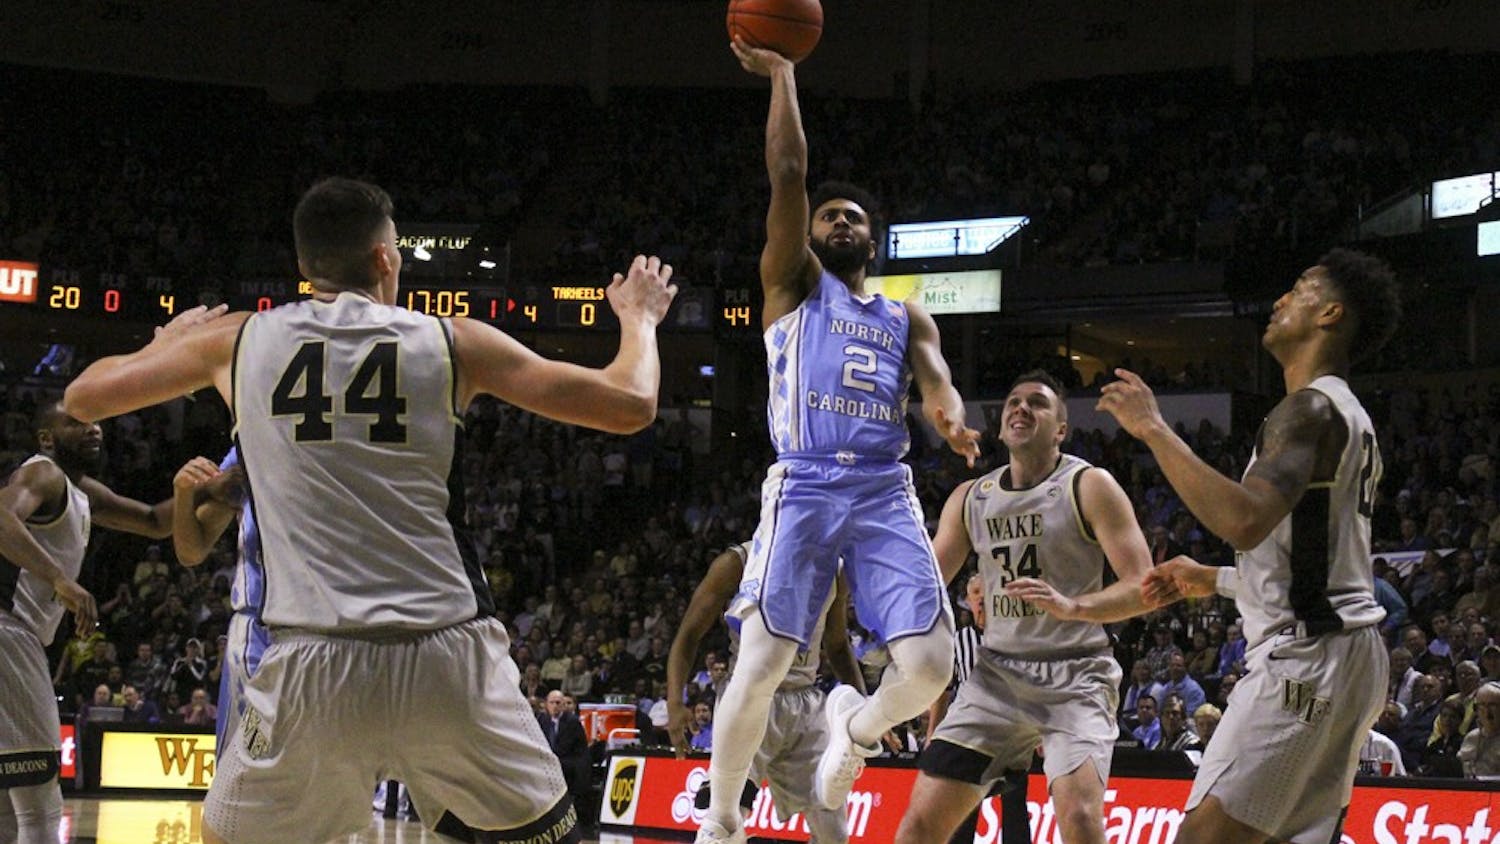 UNC guard Joel Berry (2) goes up to lay the ball against Wake Forest on Wednesday night.